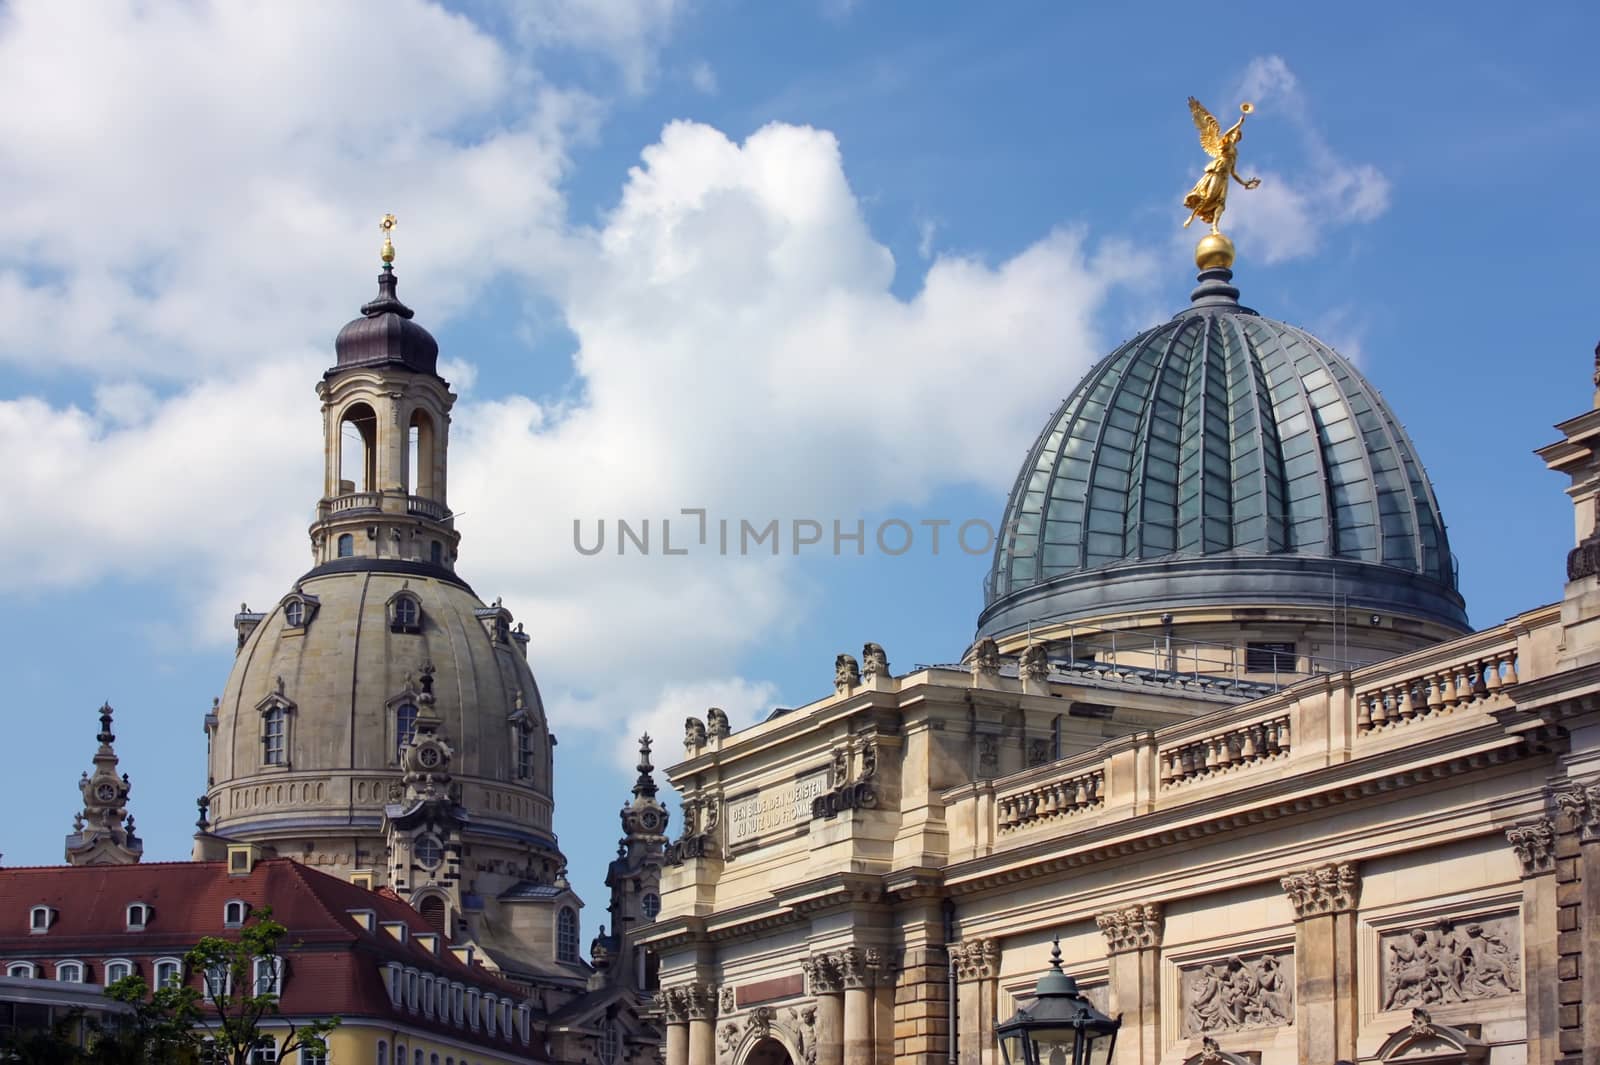 Old town of Dresden,Saxony,Germany by borisb17